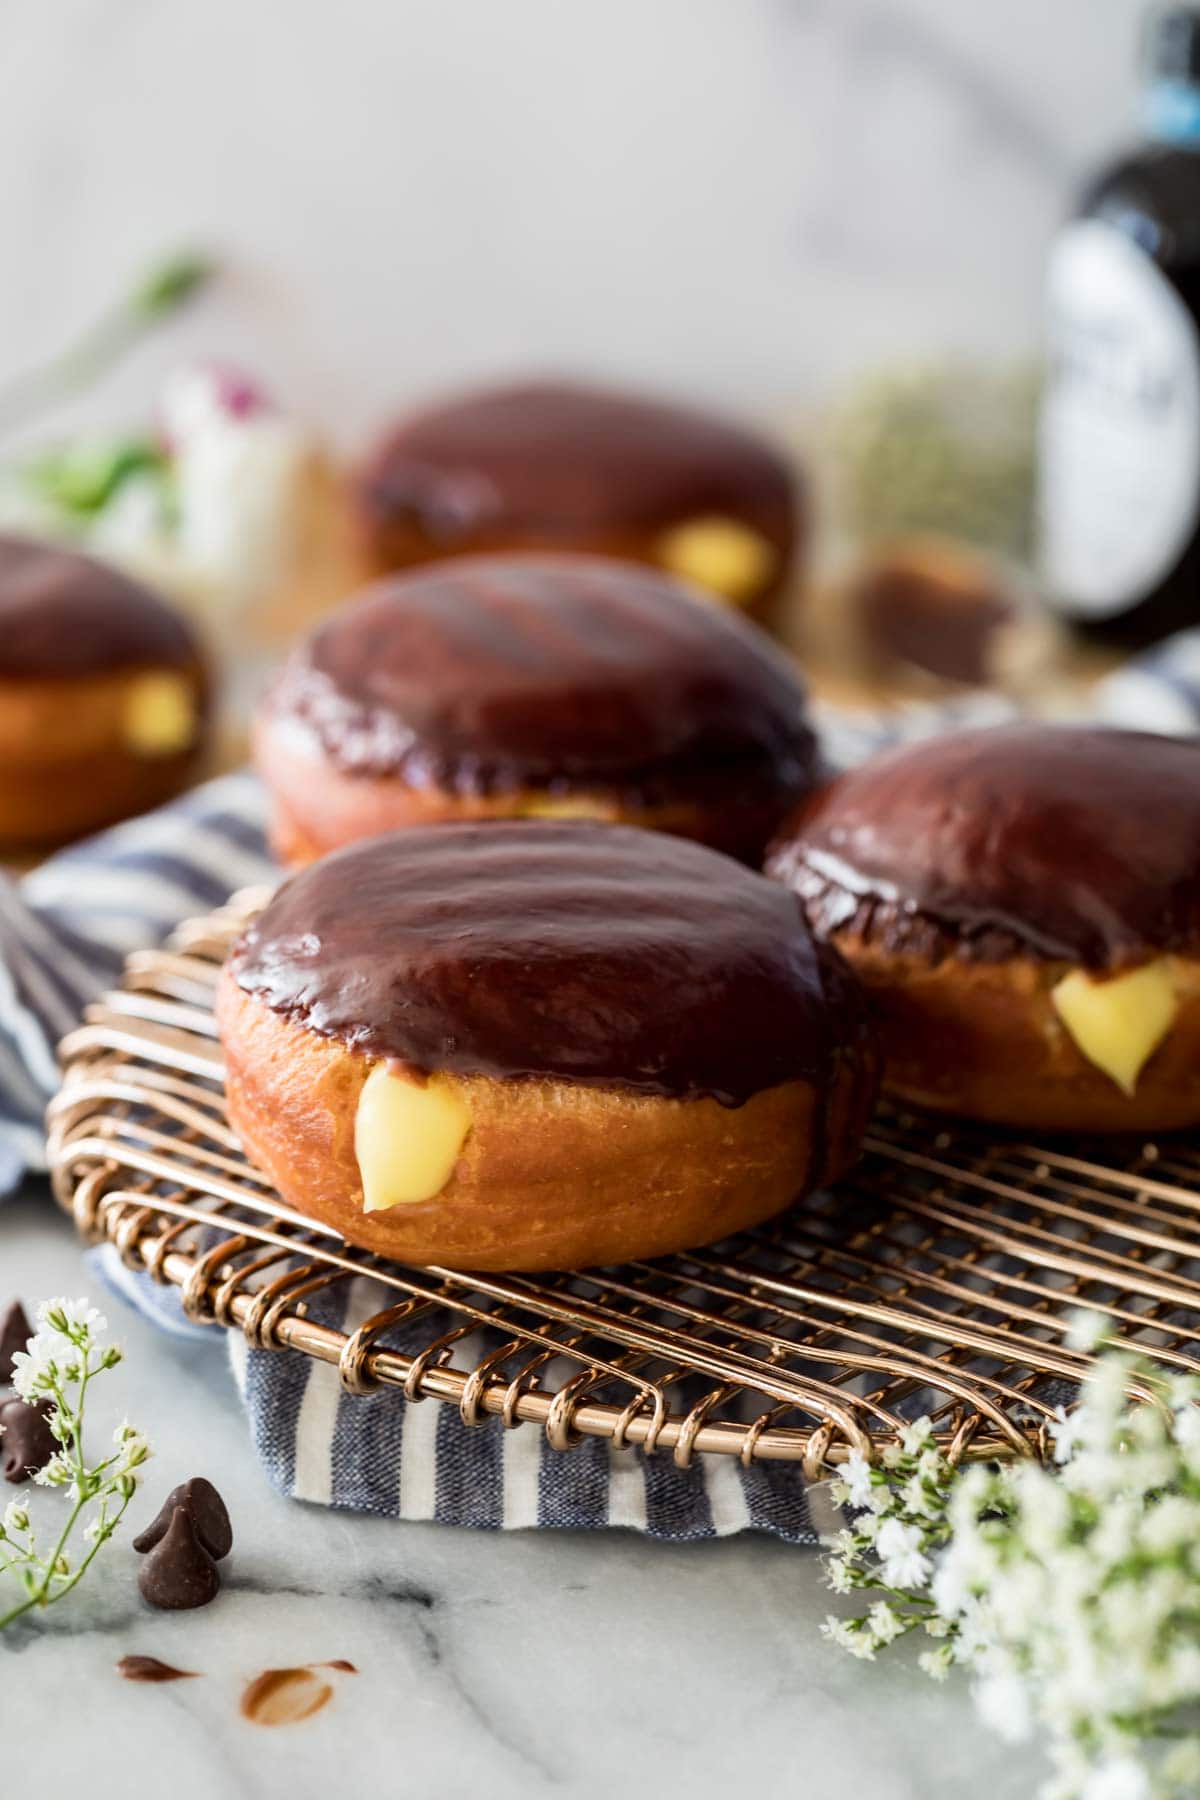 Three Boston cream donuts covered in chocolate ganache and filled with pastry cream filling on a metal cooling rack, with more donuts in the background